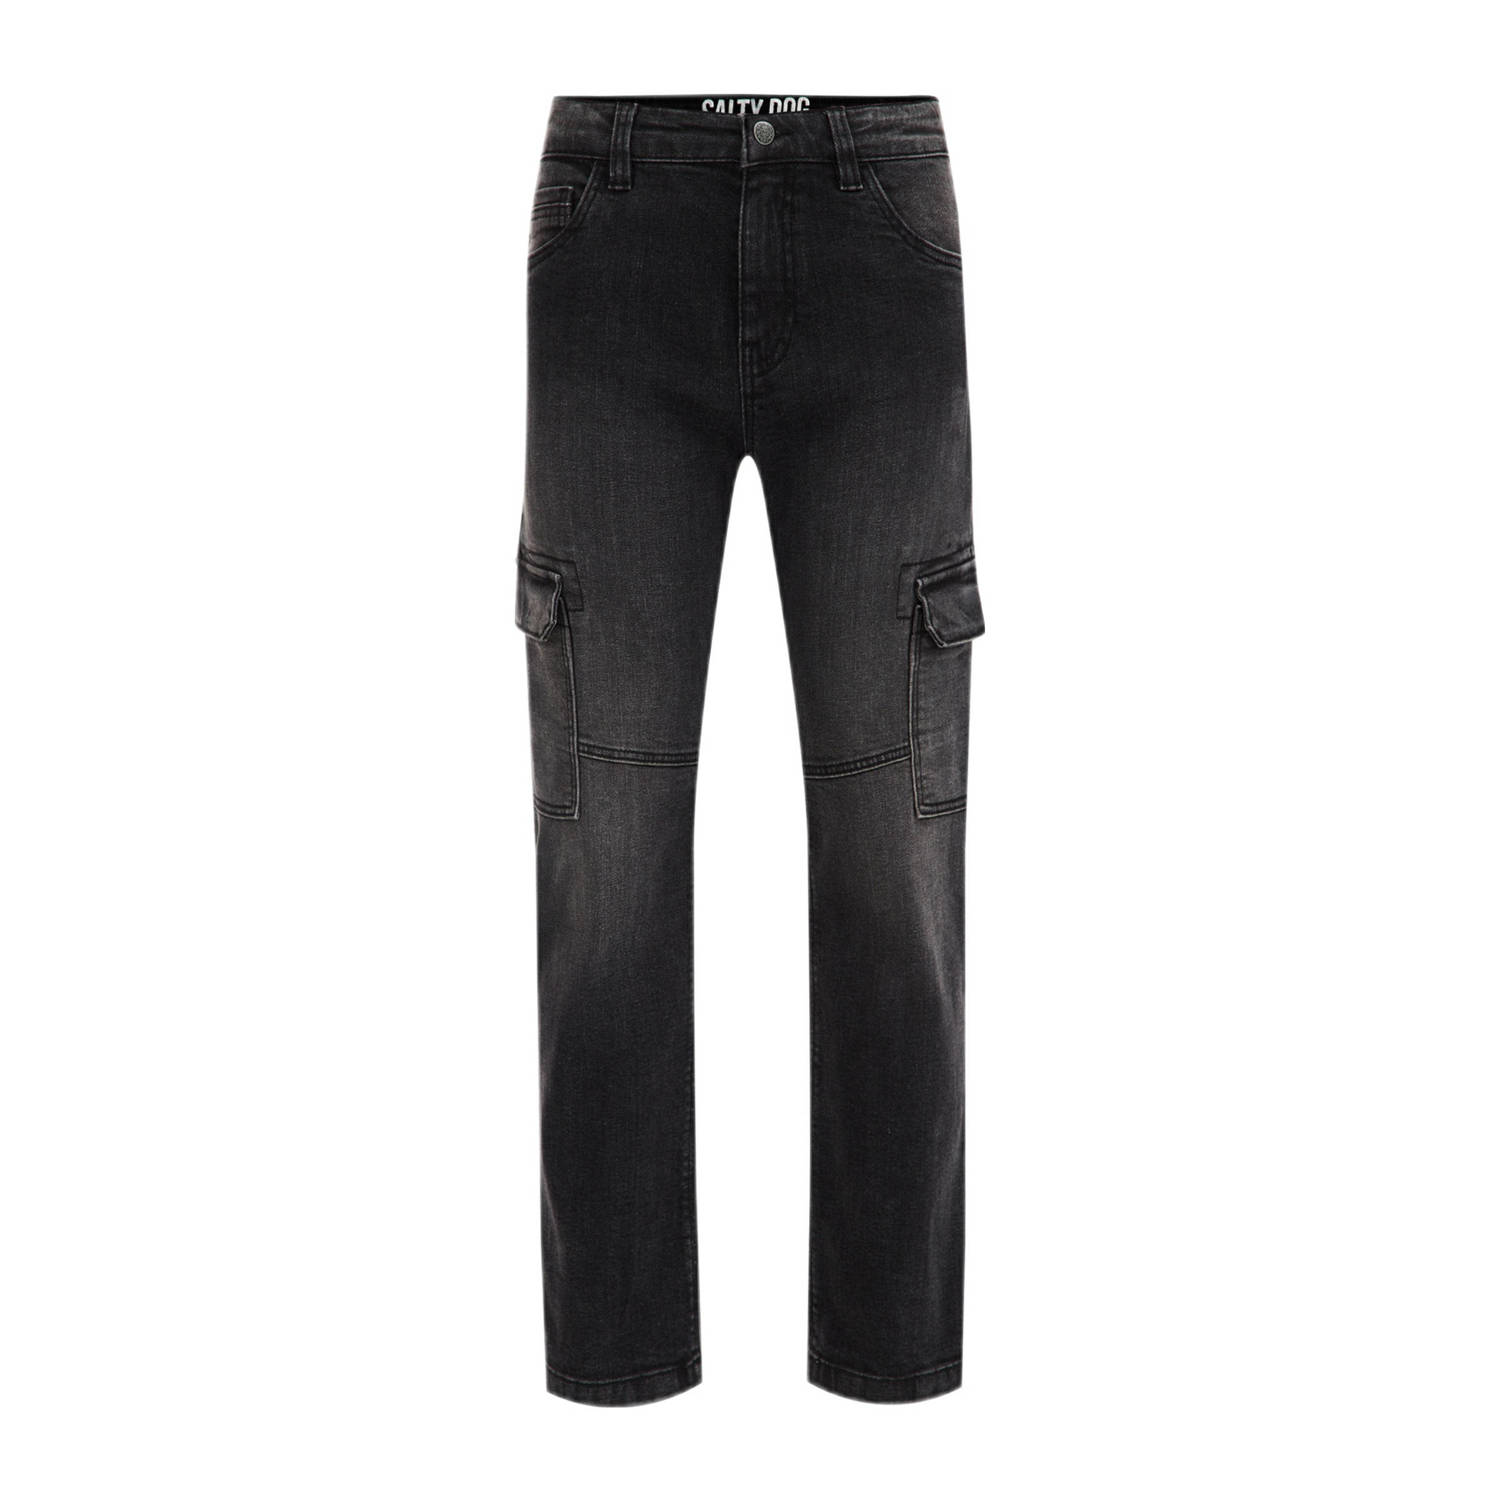 WE Fashion regular fit jeans black faded